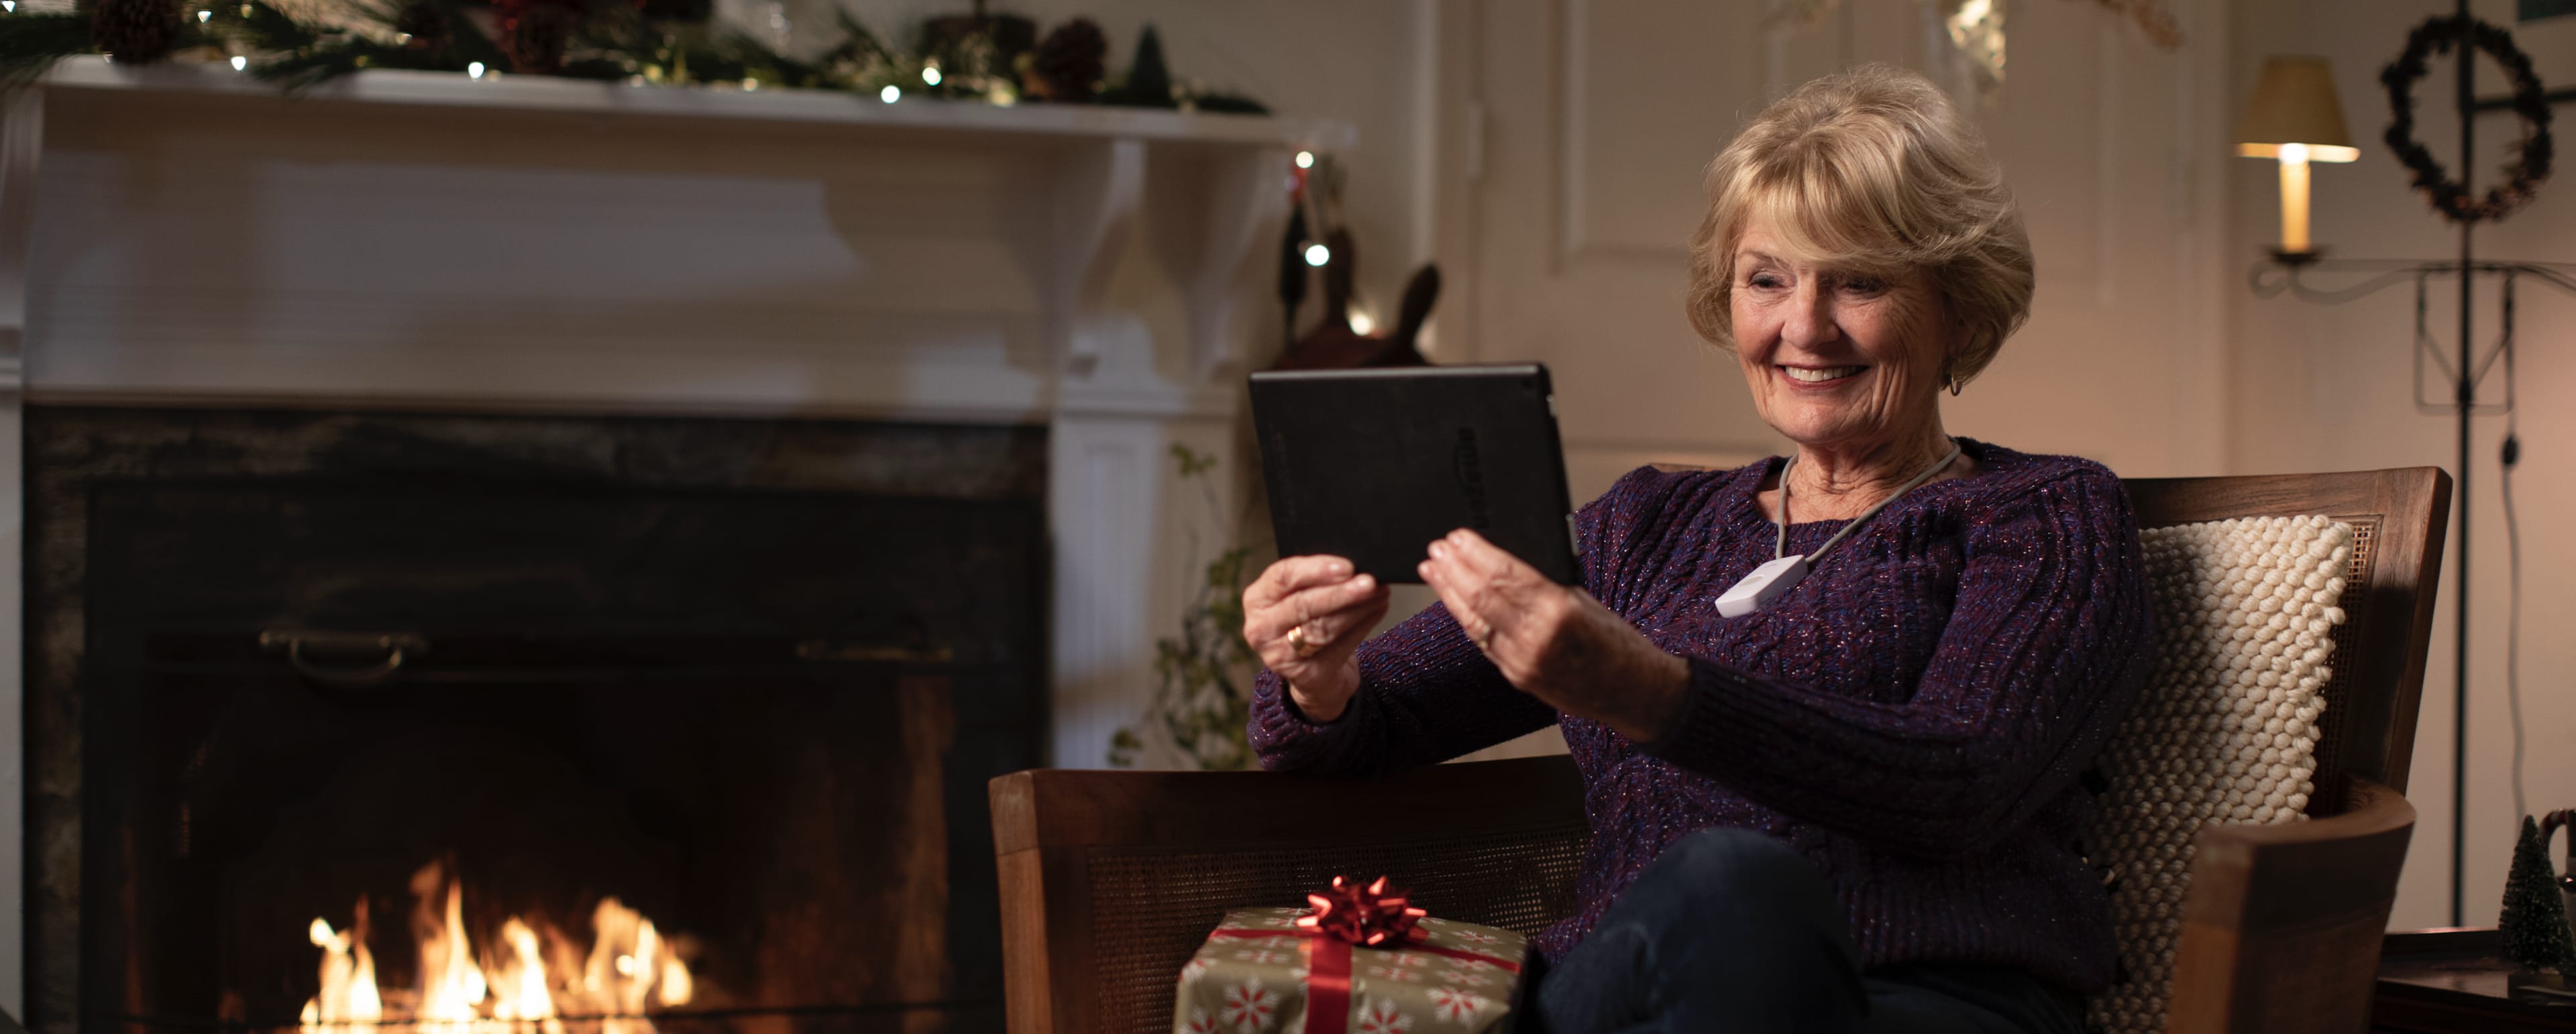 A woman posing for a winter photoshoot holding a tablet in front of a fireplace.